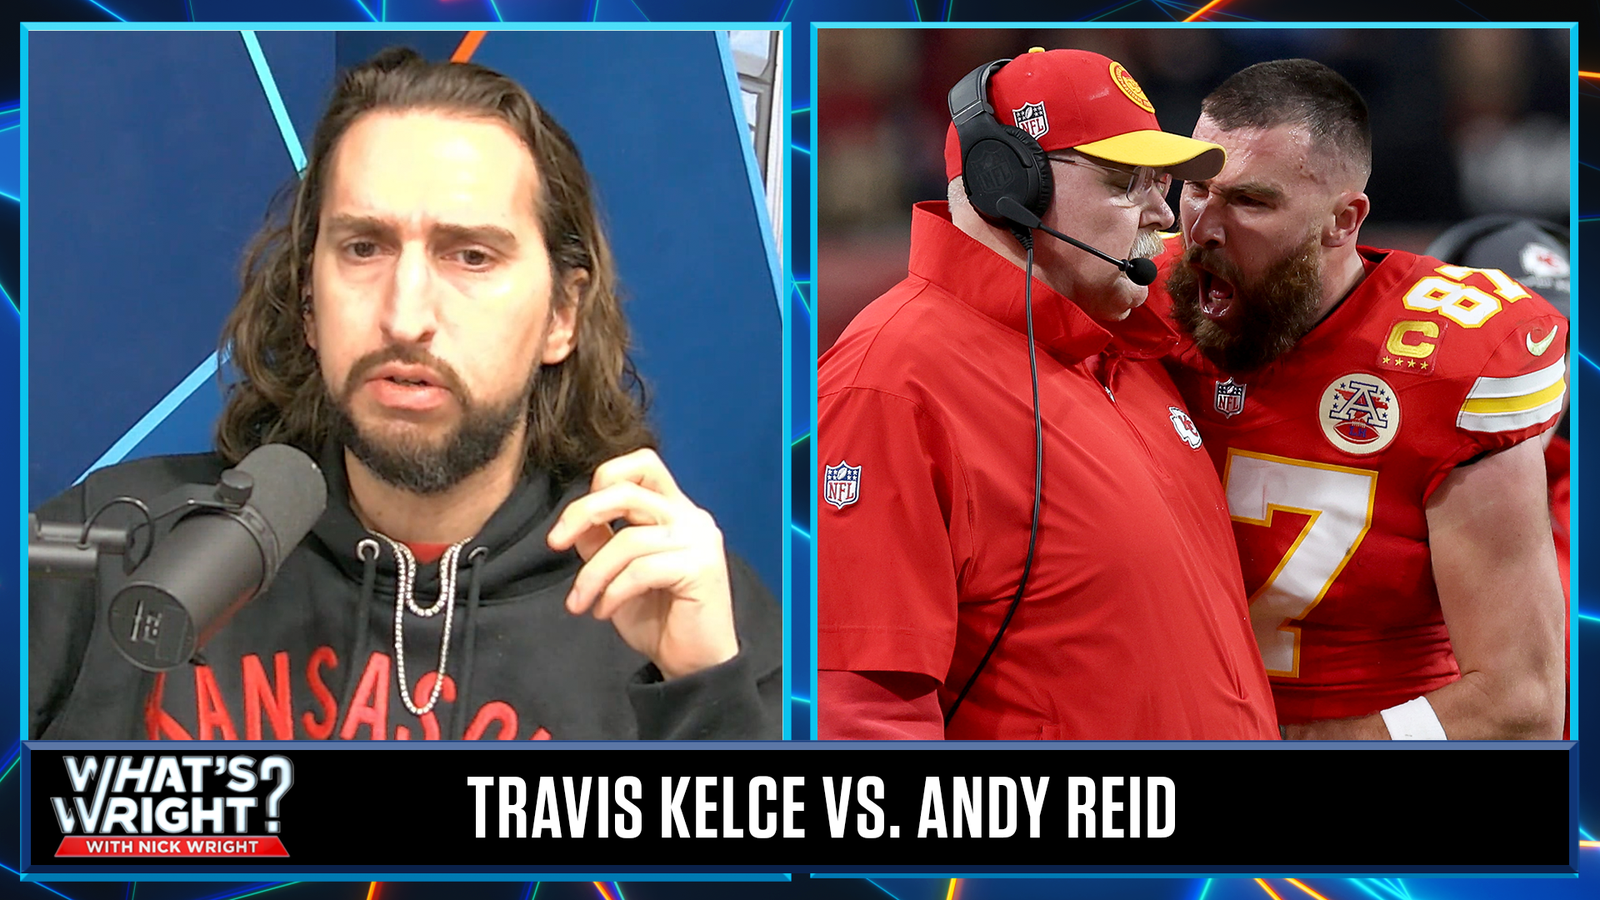 Adding context to Travis Kelce’s blow up at Andy Reid